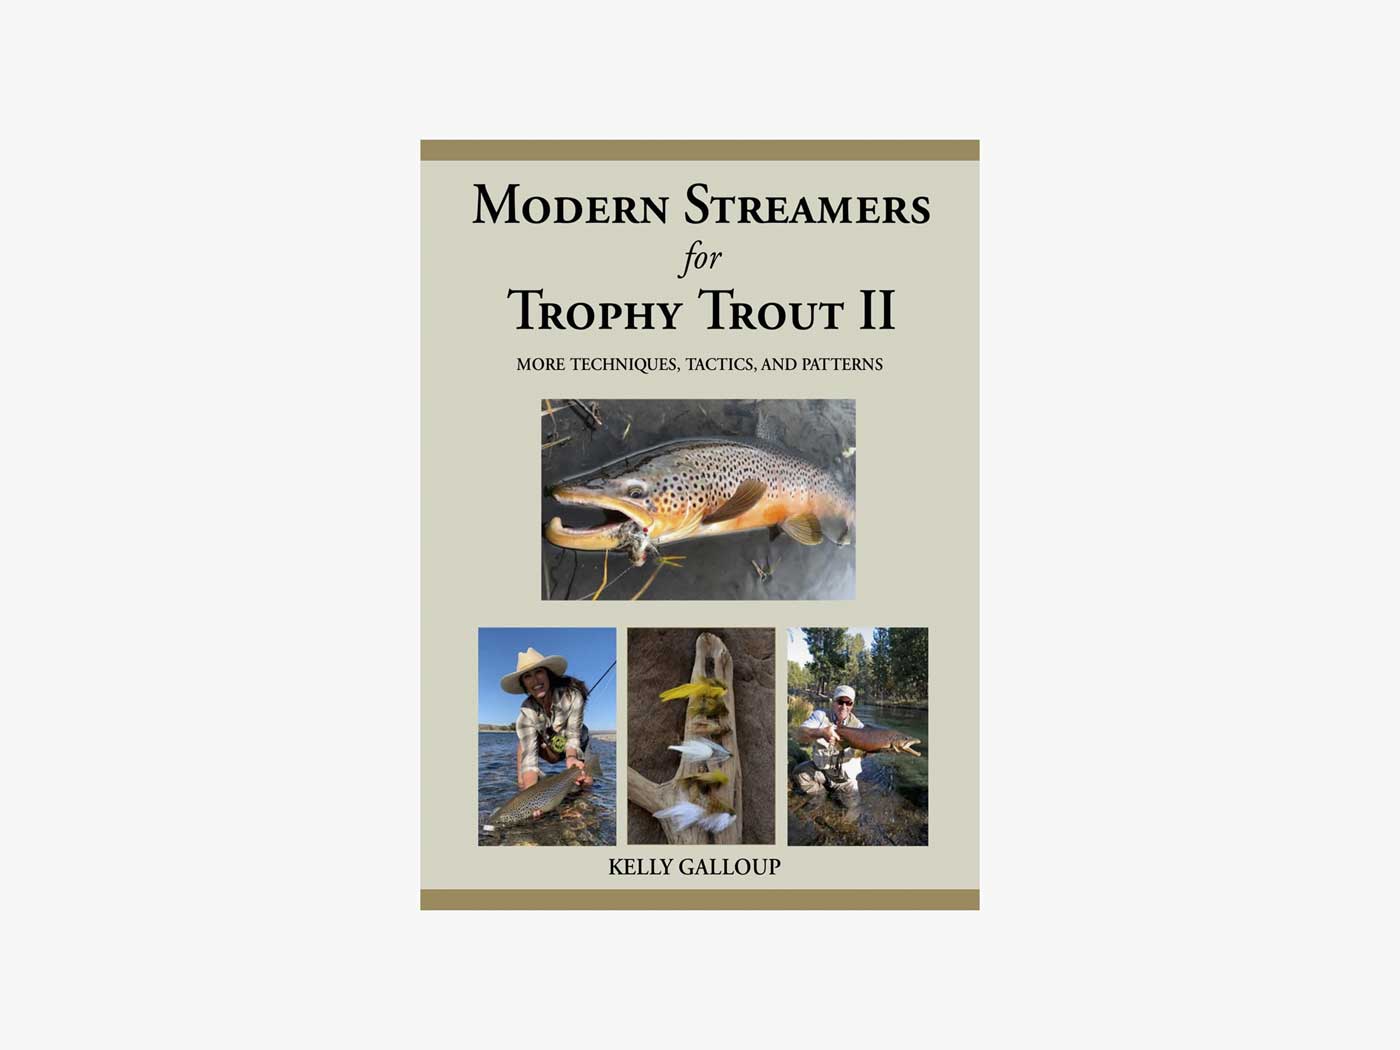 Modern Streamers for Trophy Trout II: More Techniques, Tactics, and Pa